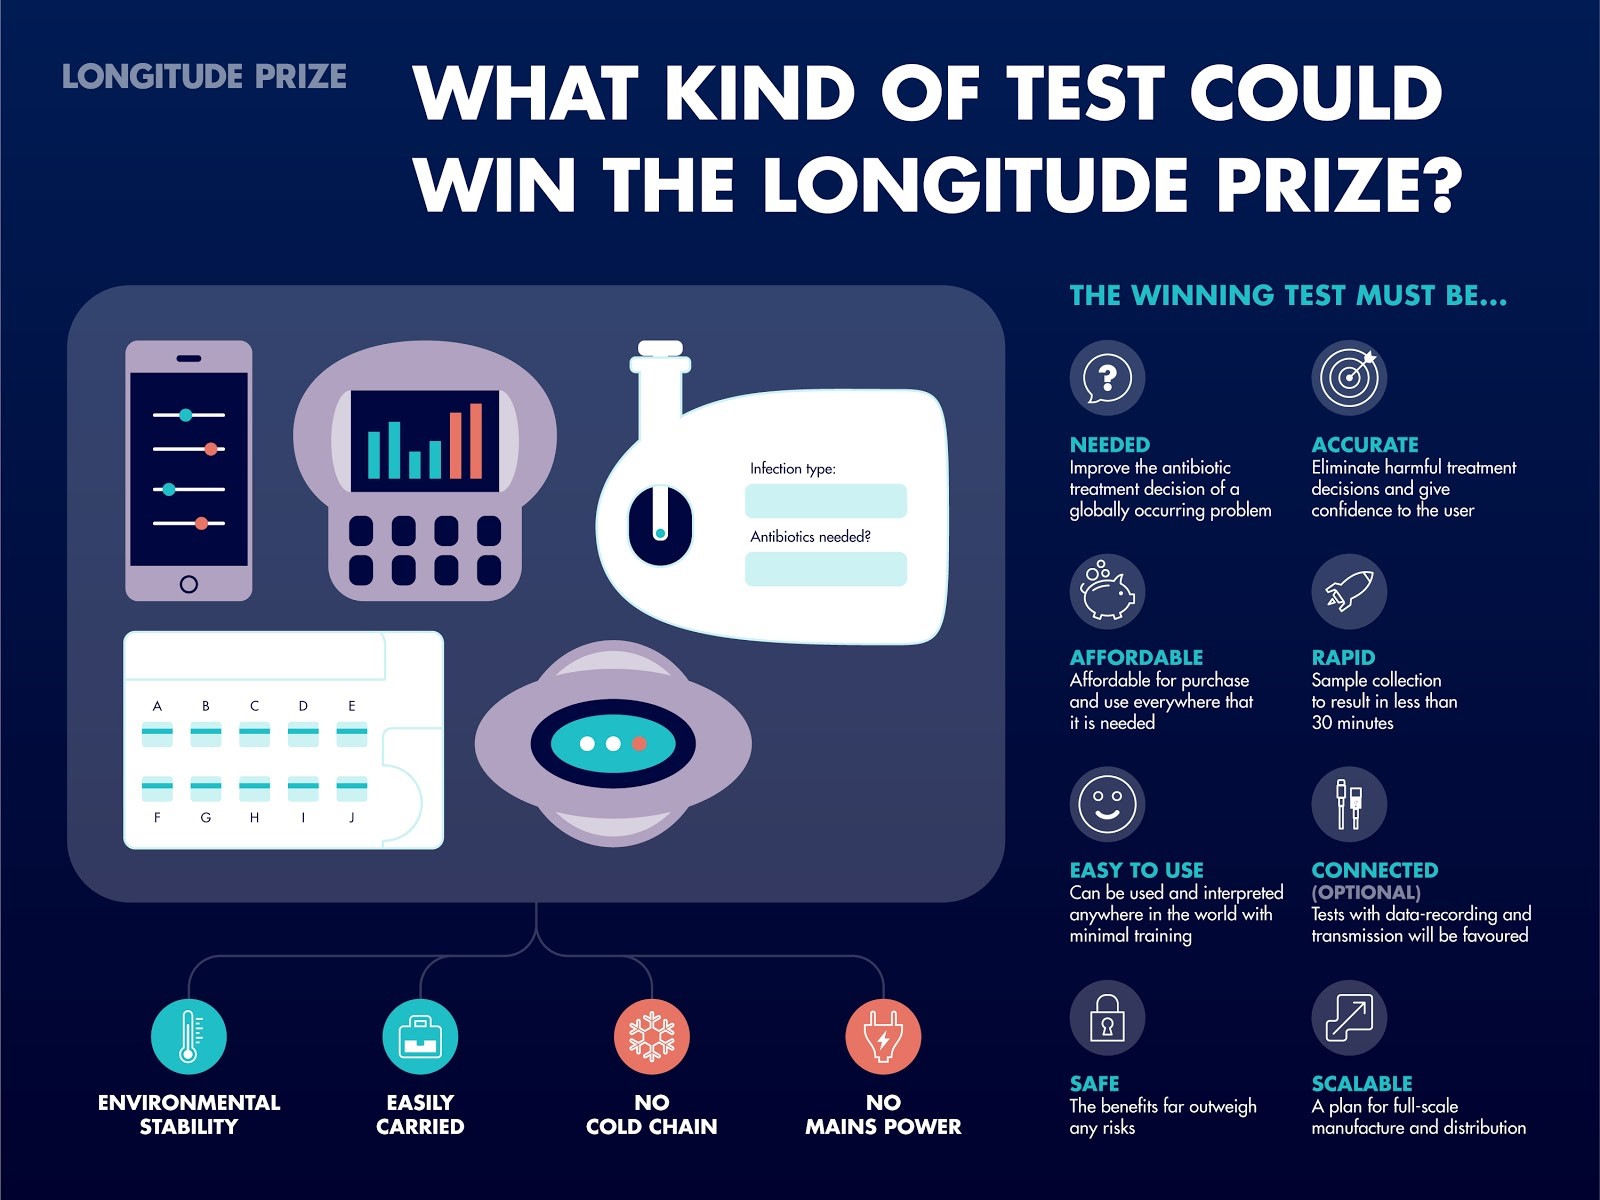 What kind of test could win the longitude prize?